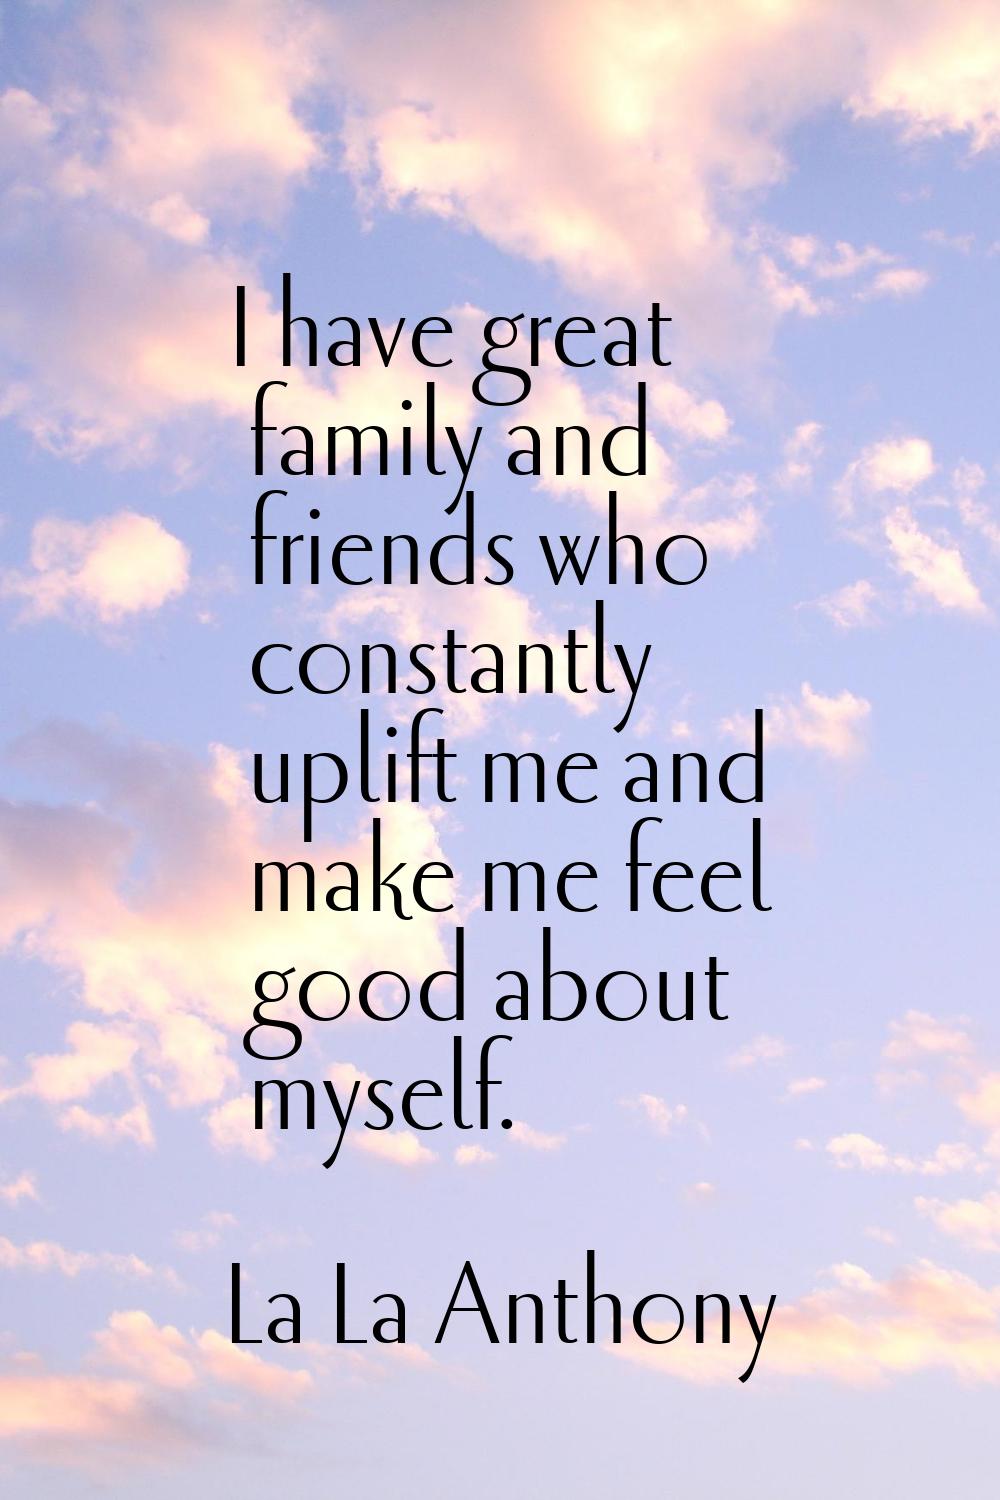 I have great family and friends who constantly uplift me and make me feel good about myself.